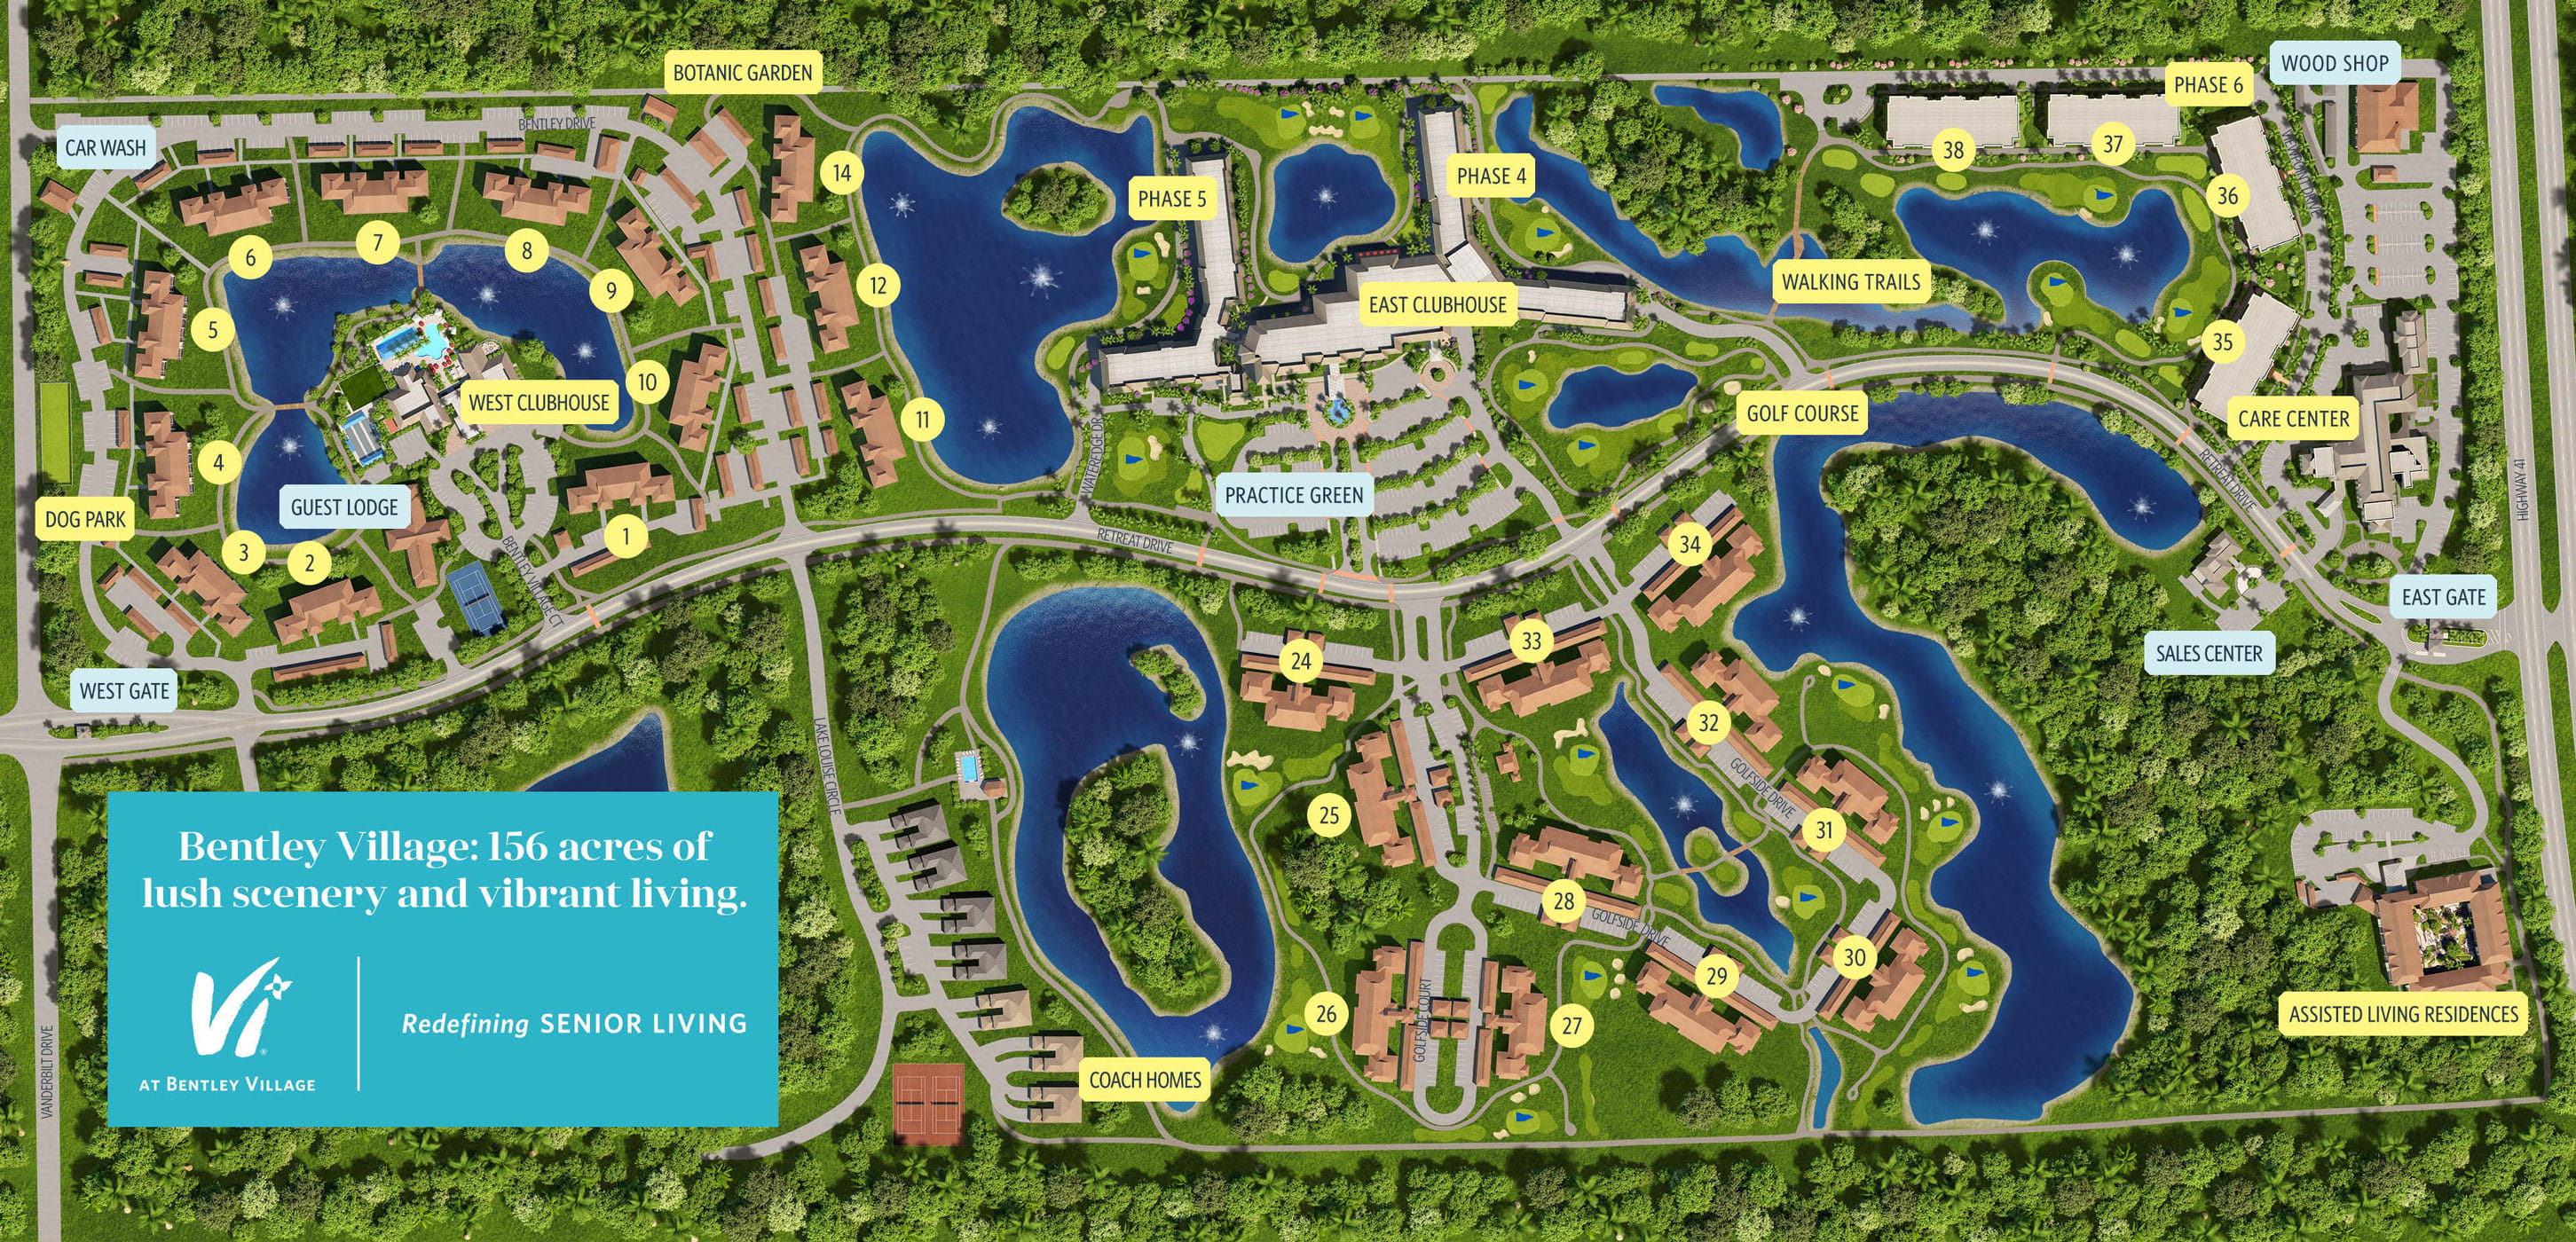 A map of the Vi at Bentley Village community.